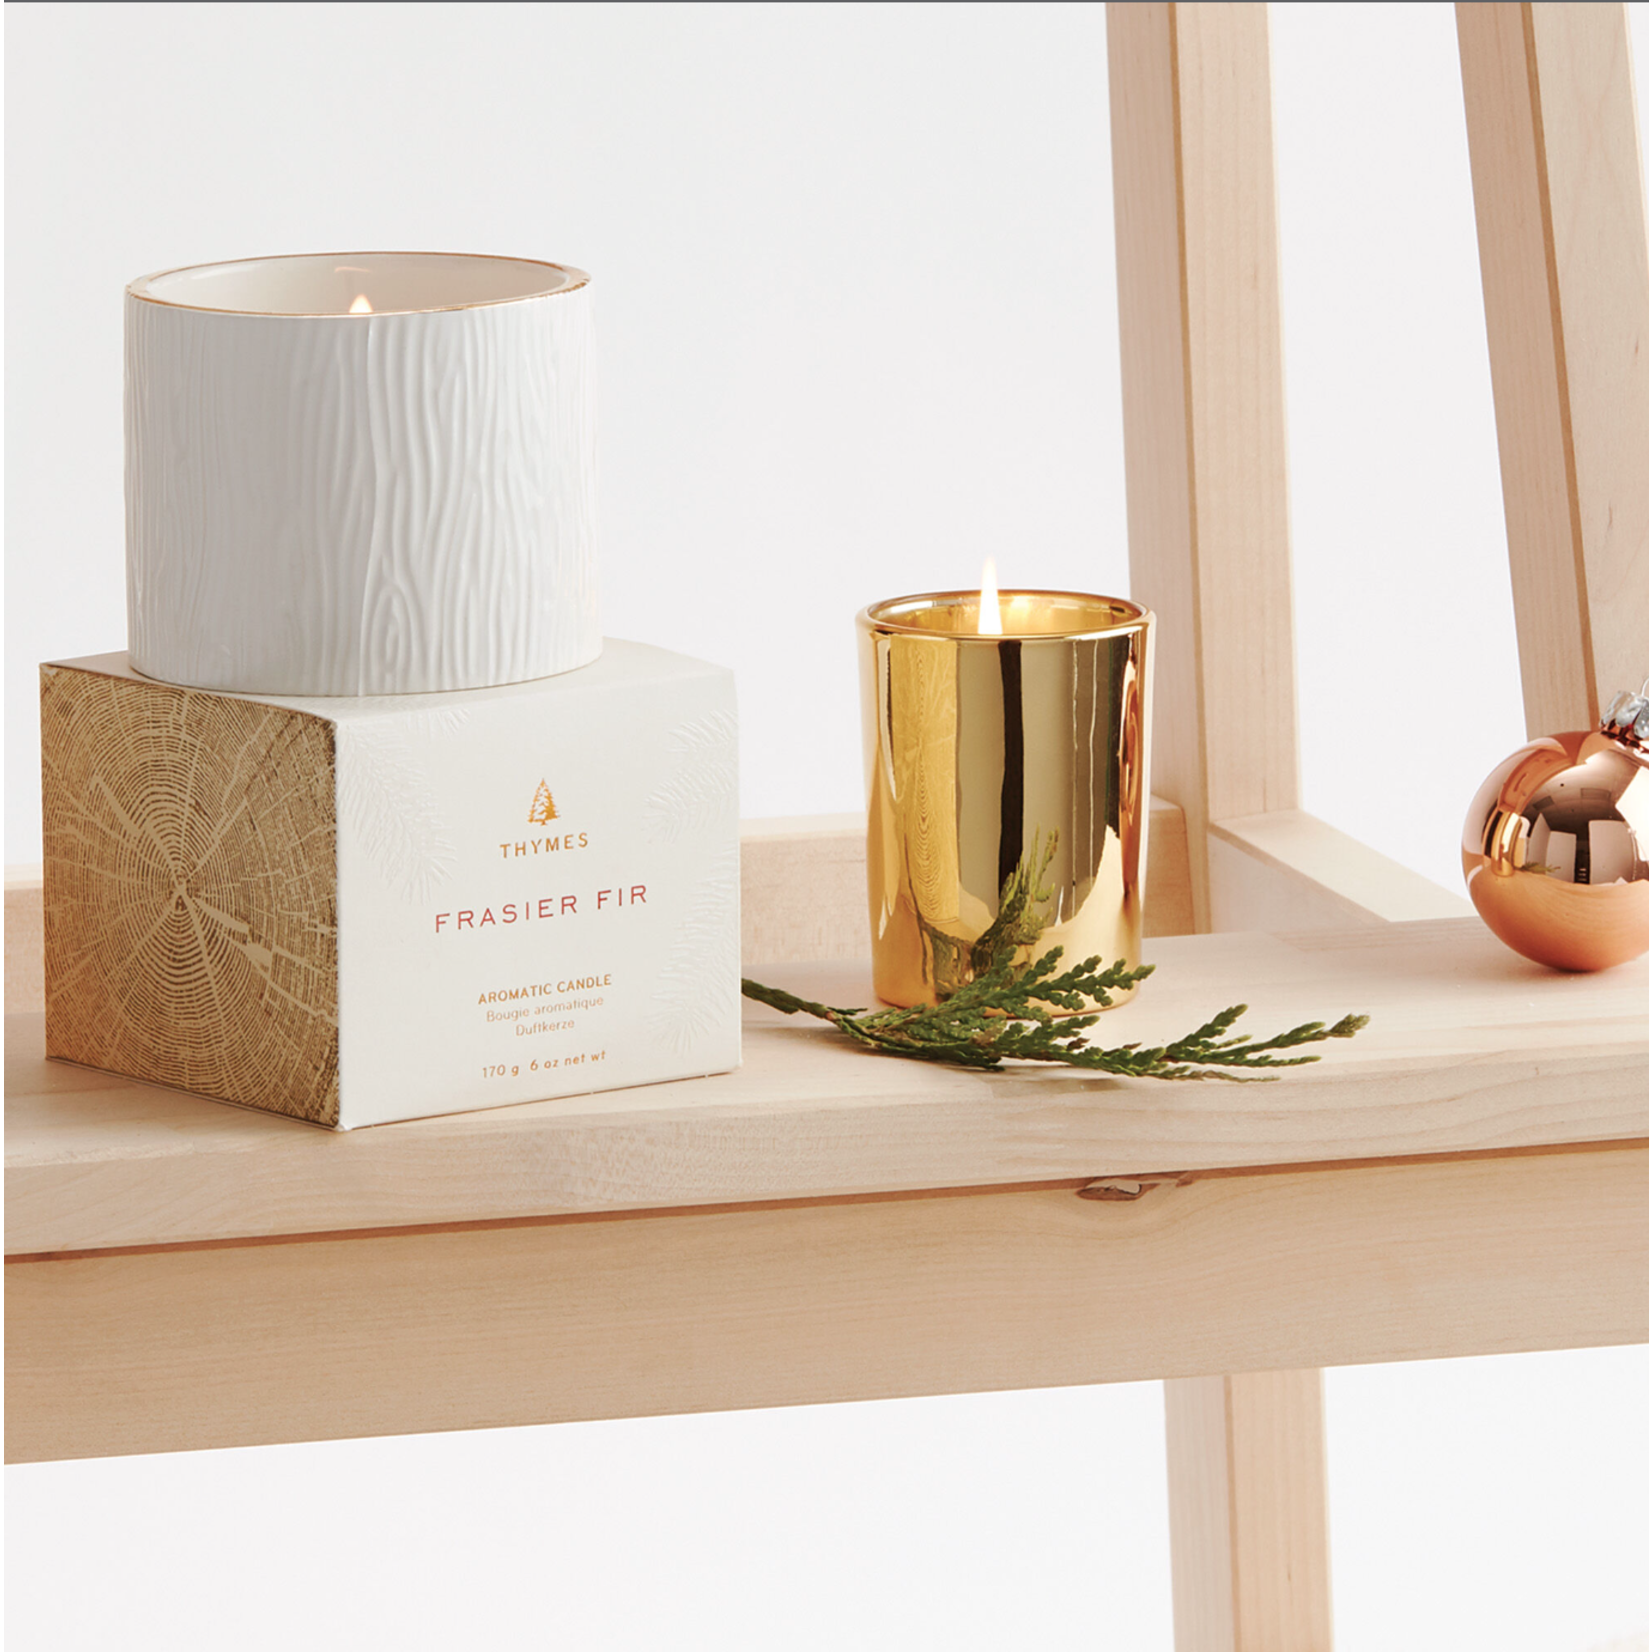 Thymes Frasier Fir Gilded Ceramic Candle - Petite